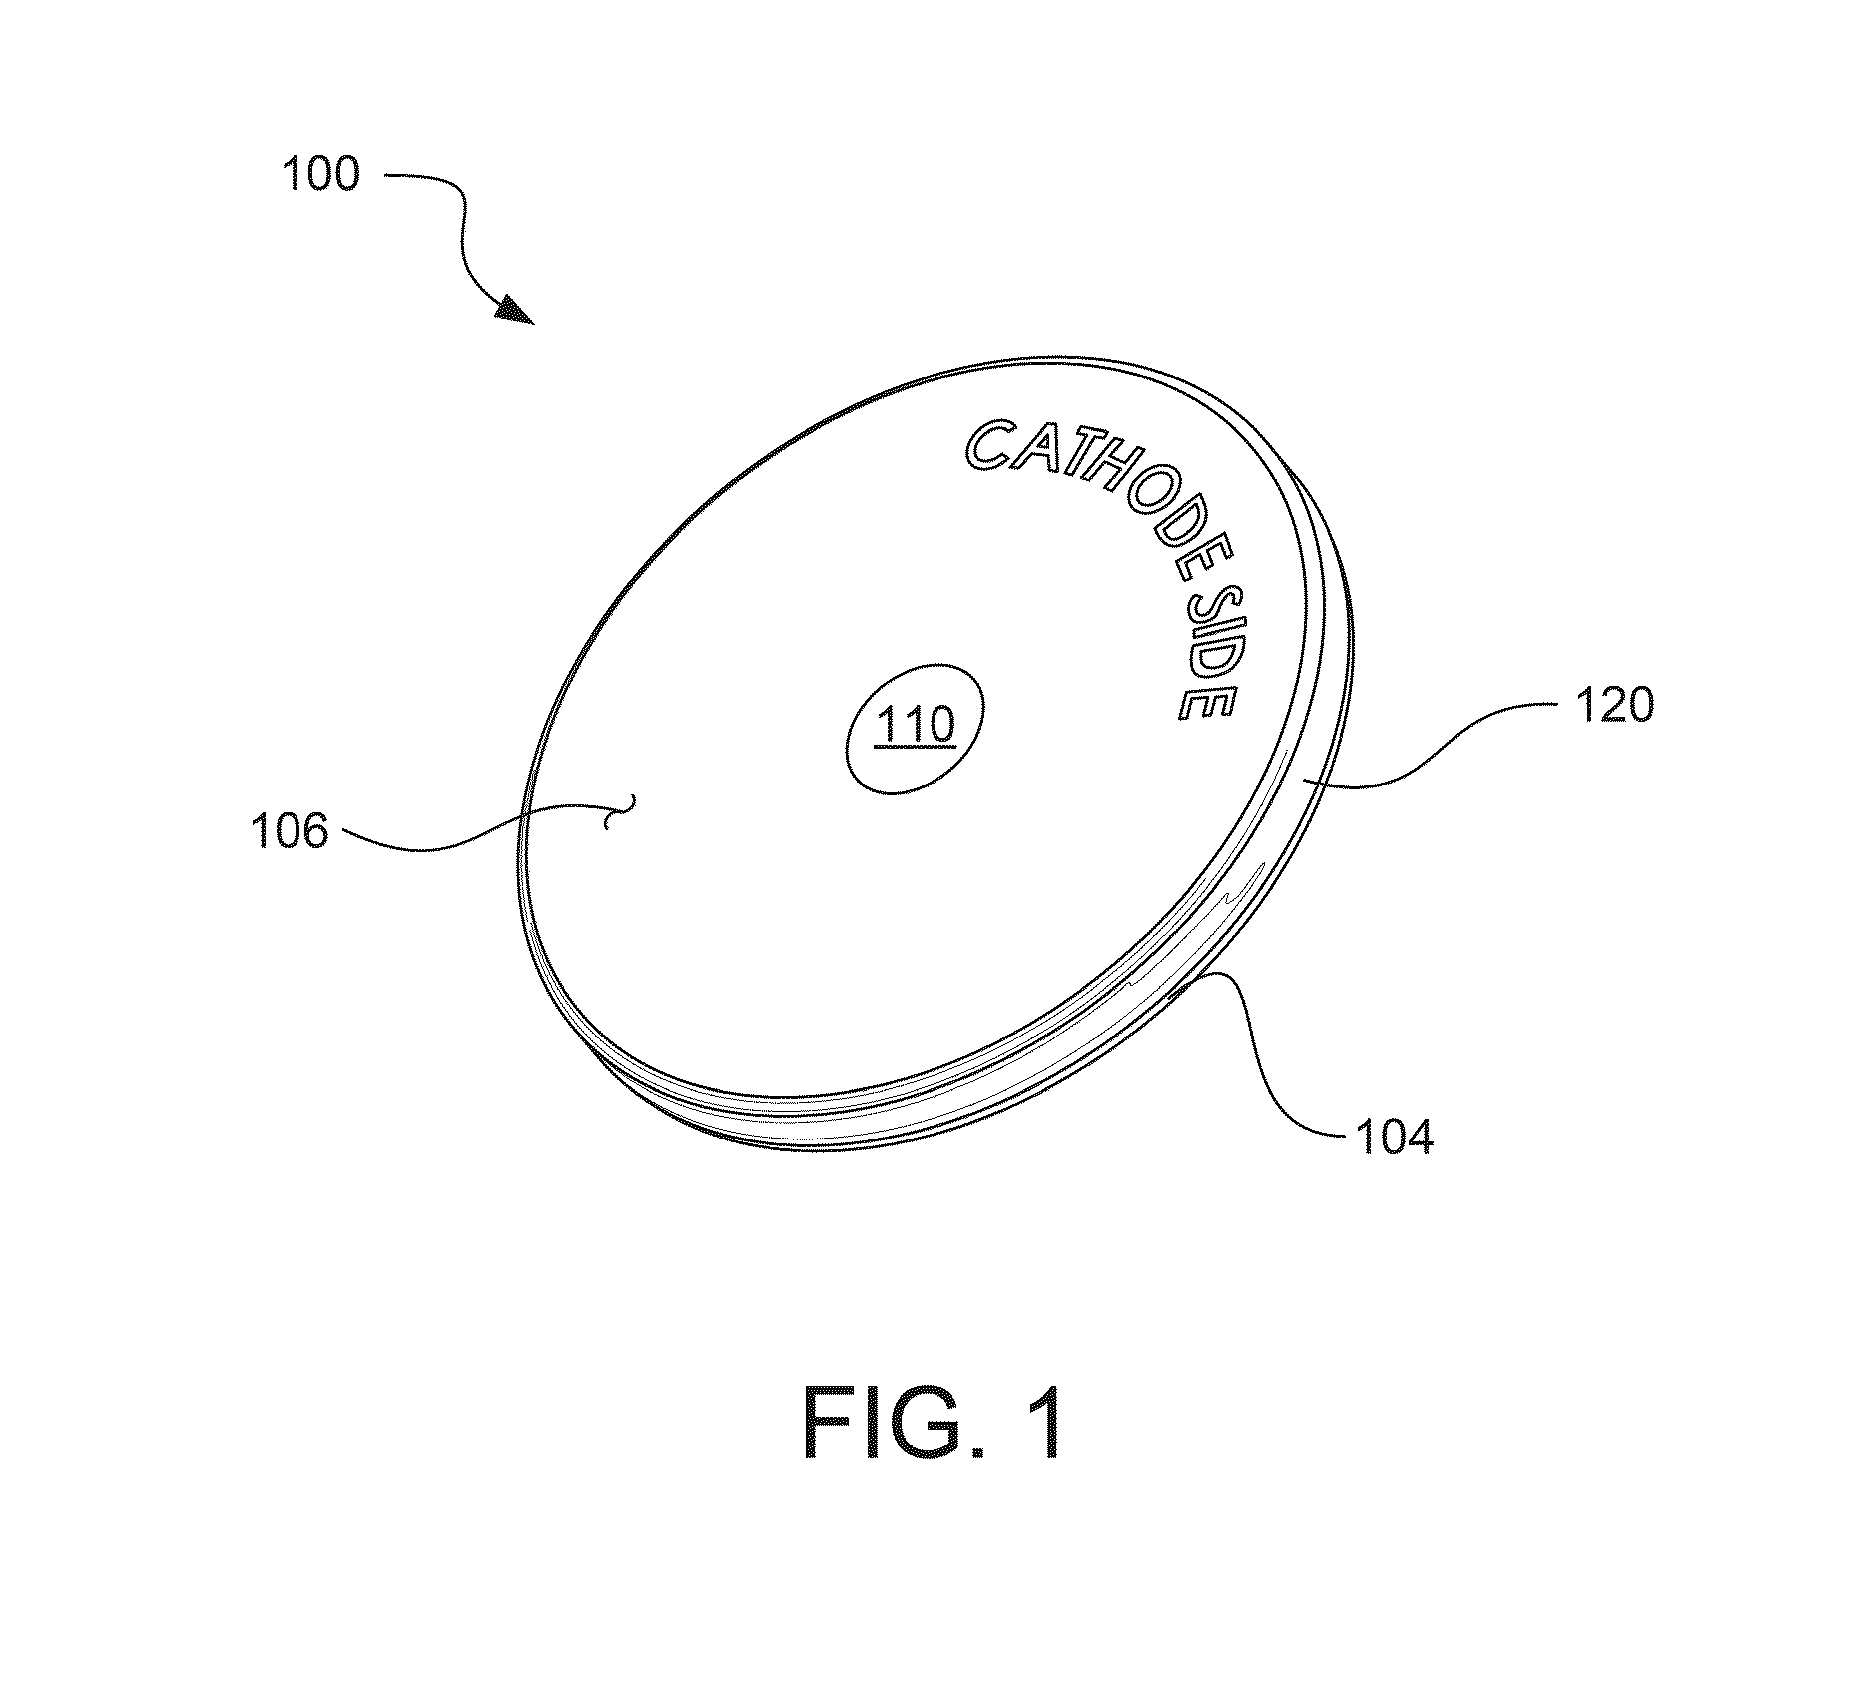 Methods and Systems for Treating Cardiovascular Disease Using an Implantable Electroacupuncture Device